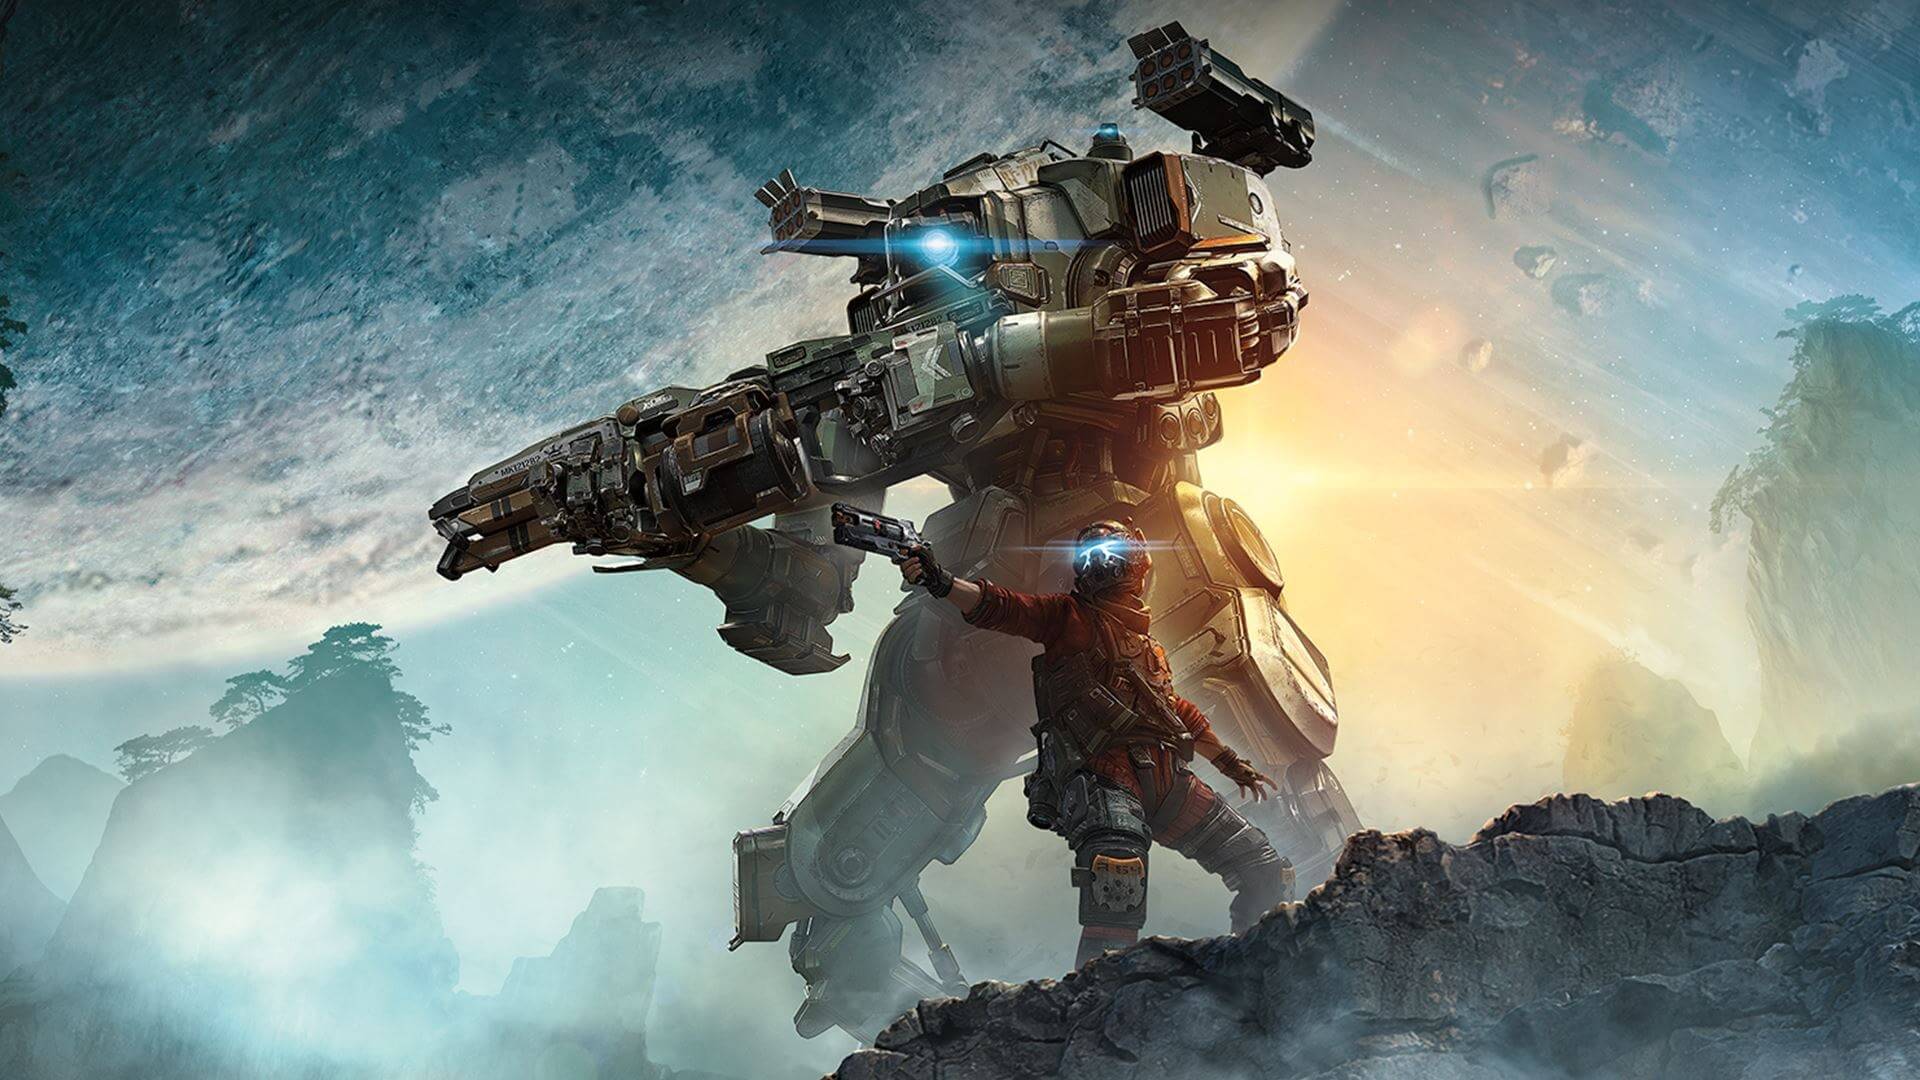 Titanfall producer says 'we are not making Titanfall 3'